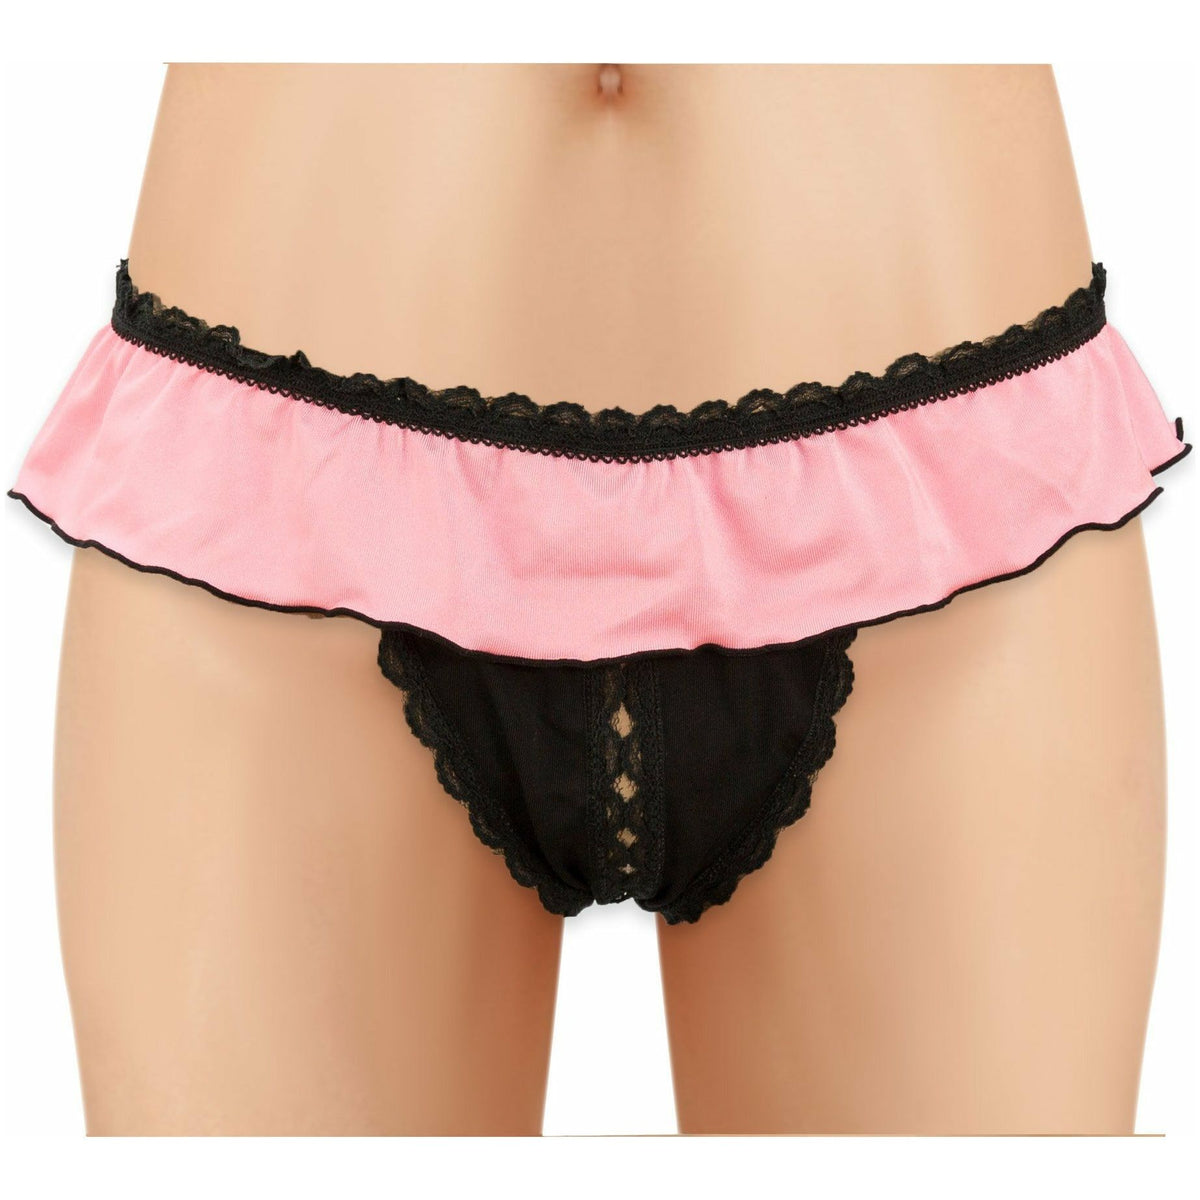 Black and Pink Crotchless Panty - O/S